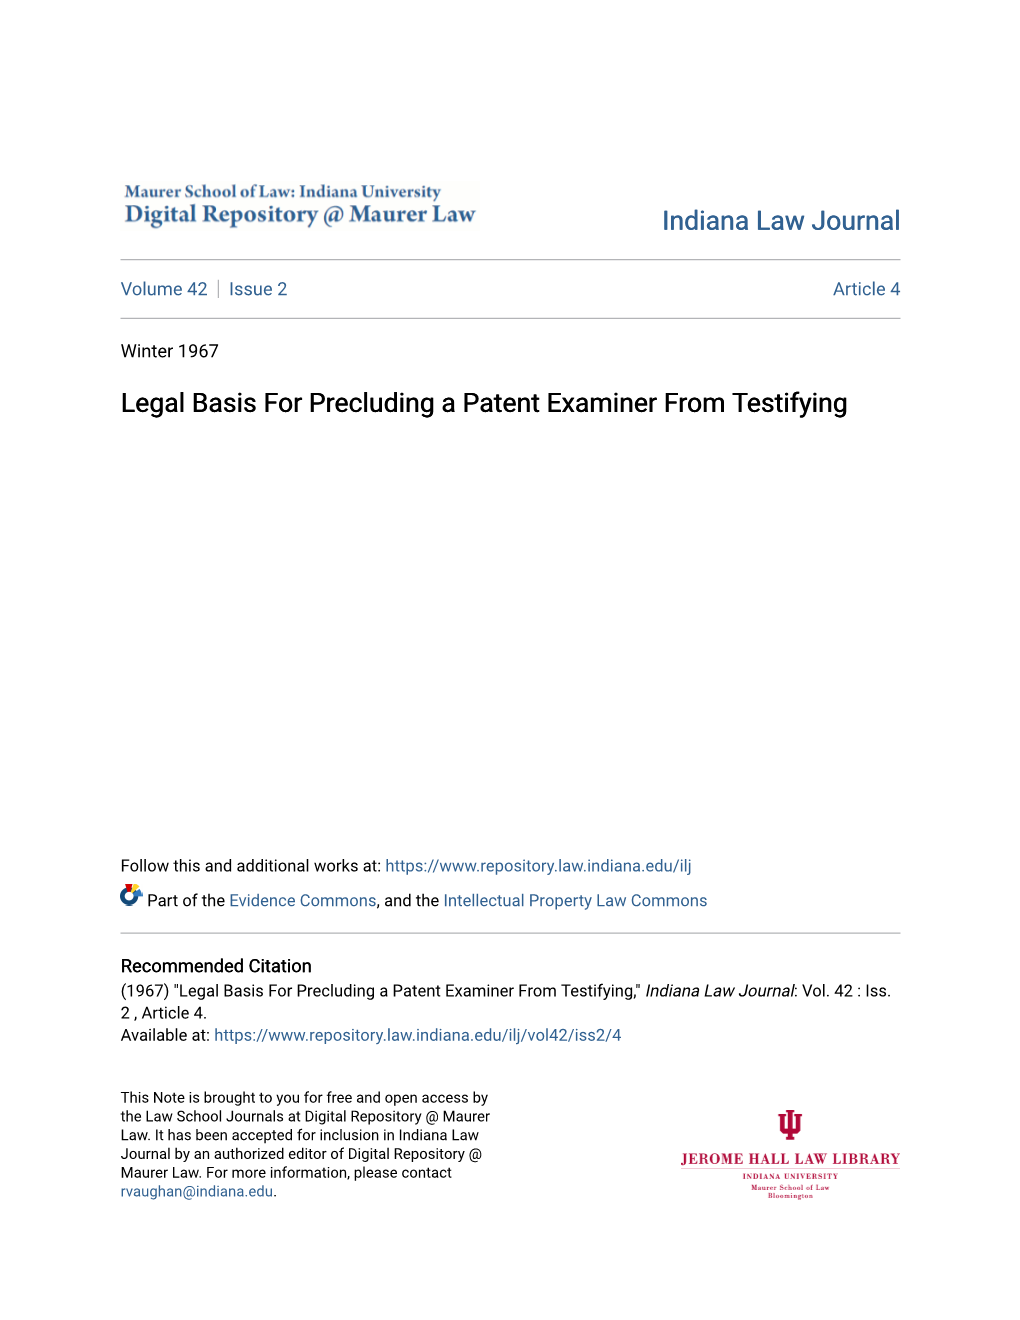 Legal Basis for Precluding a Patent Examiner from Testifying